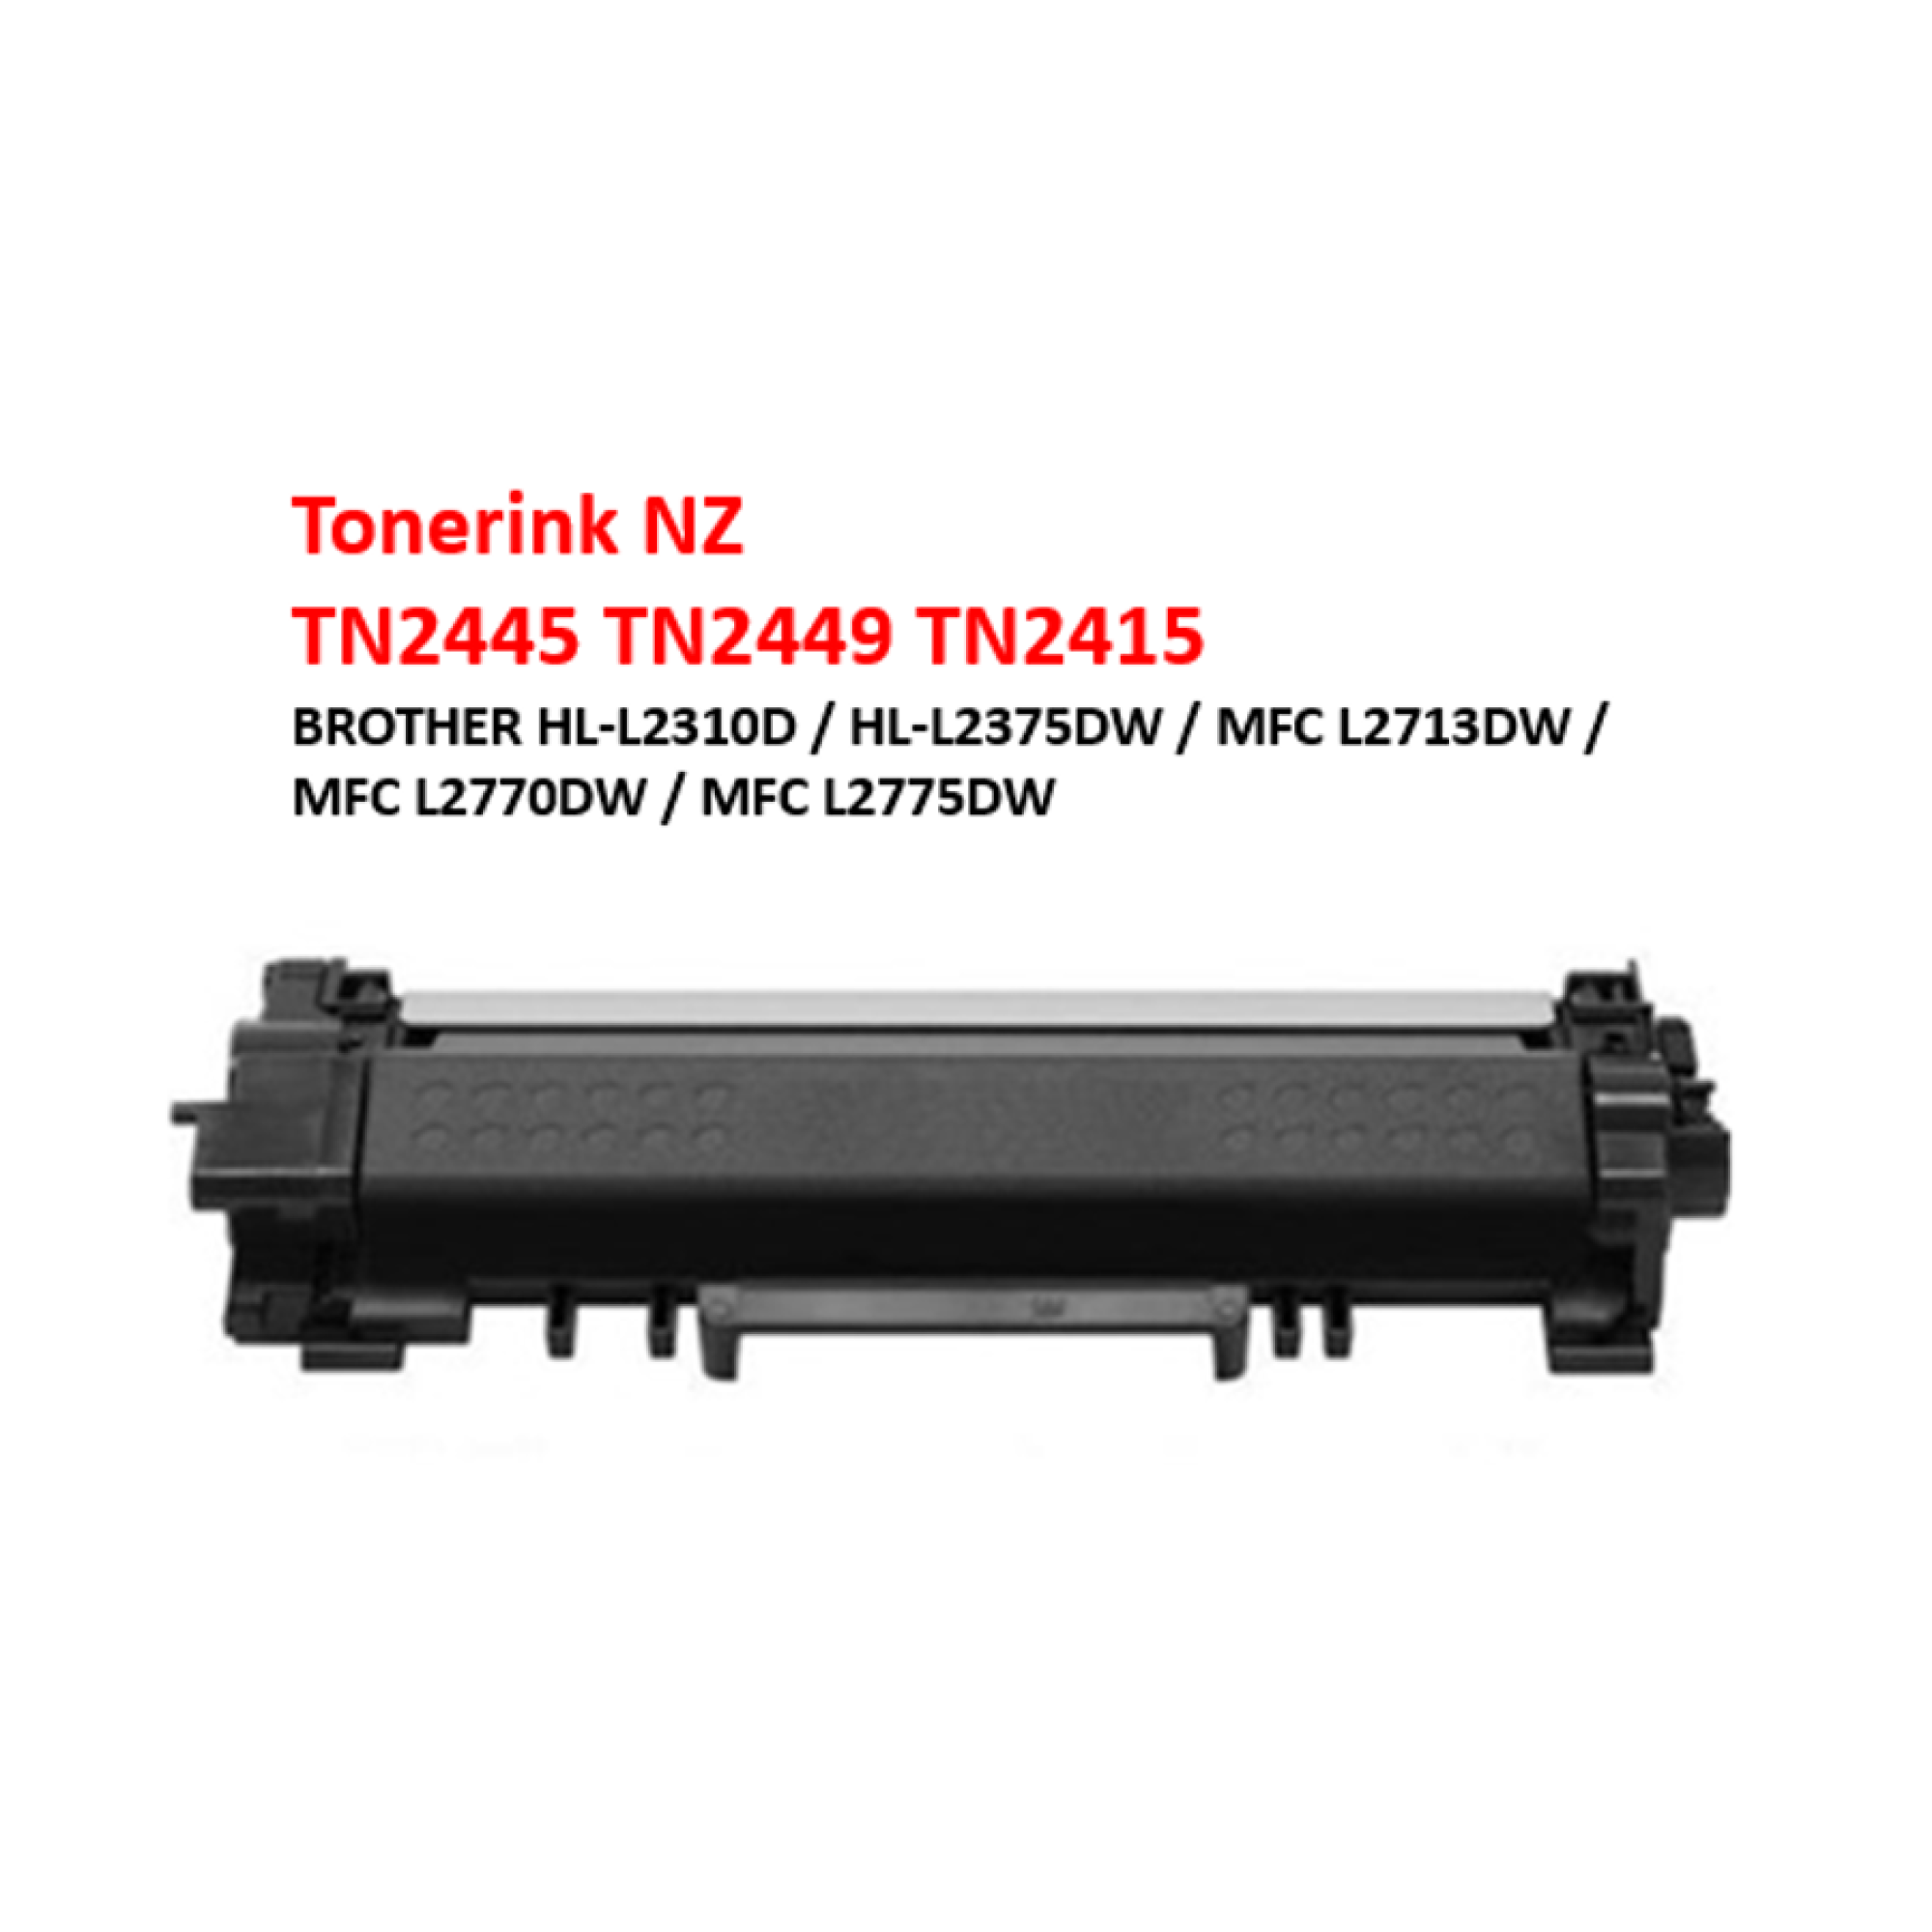 Brother Tn2445 For MFCL2770DW Black Toner Compatible